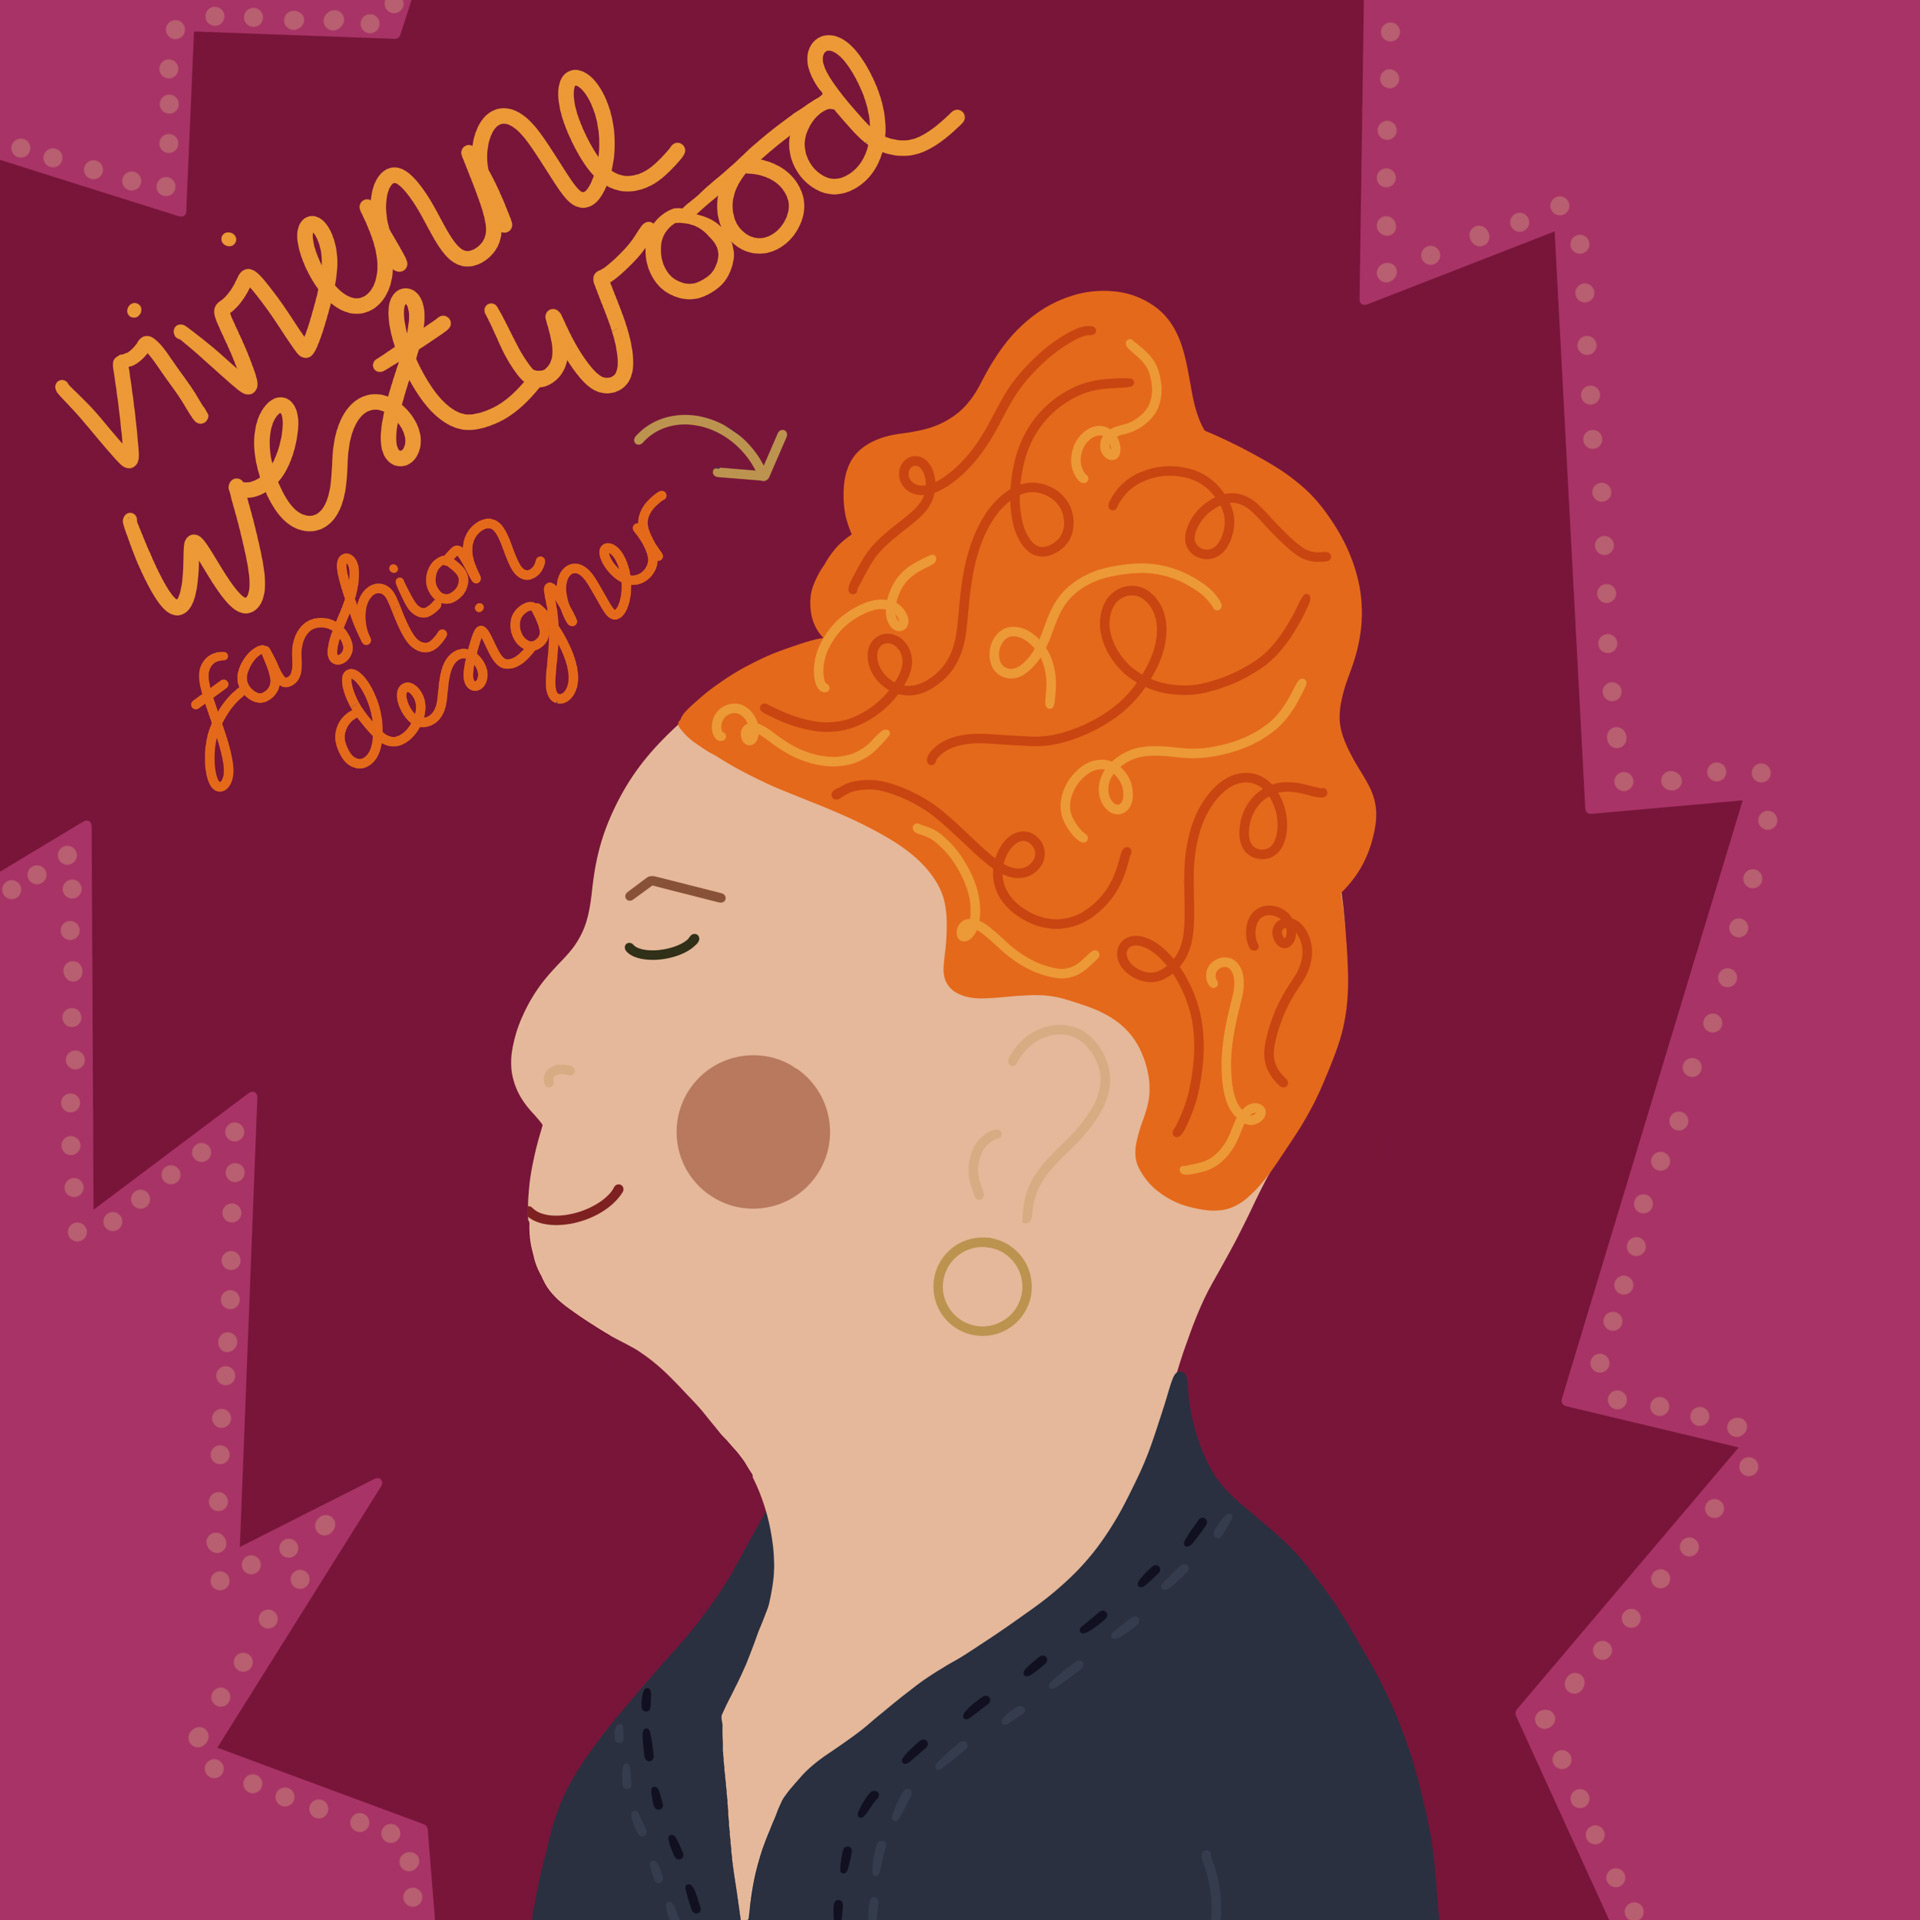 A side-profile portrait of Vivienne Westwood illustrated in a whimsical and playful illustration style.  Vivienne is depicted front-and-centre in a square image, set against a purple and pink zig-zag pattern background. A hand-drawn caption accompanies the portrait, stating 'Vivienne Westwood: Fashion Designer'. 